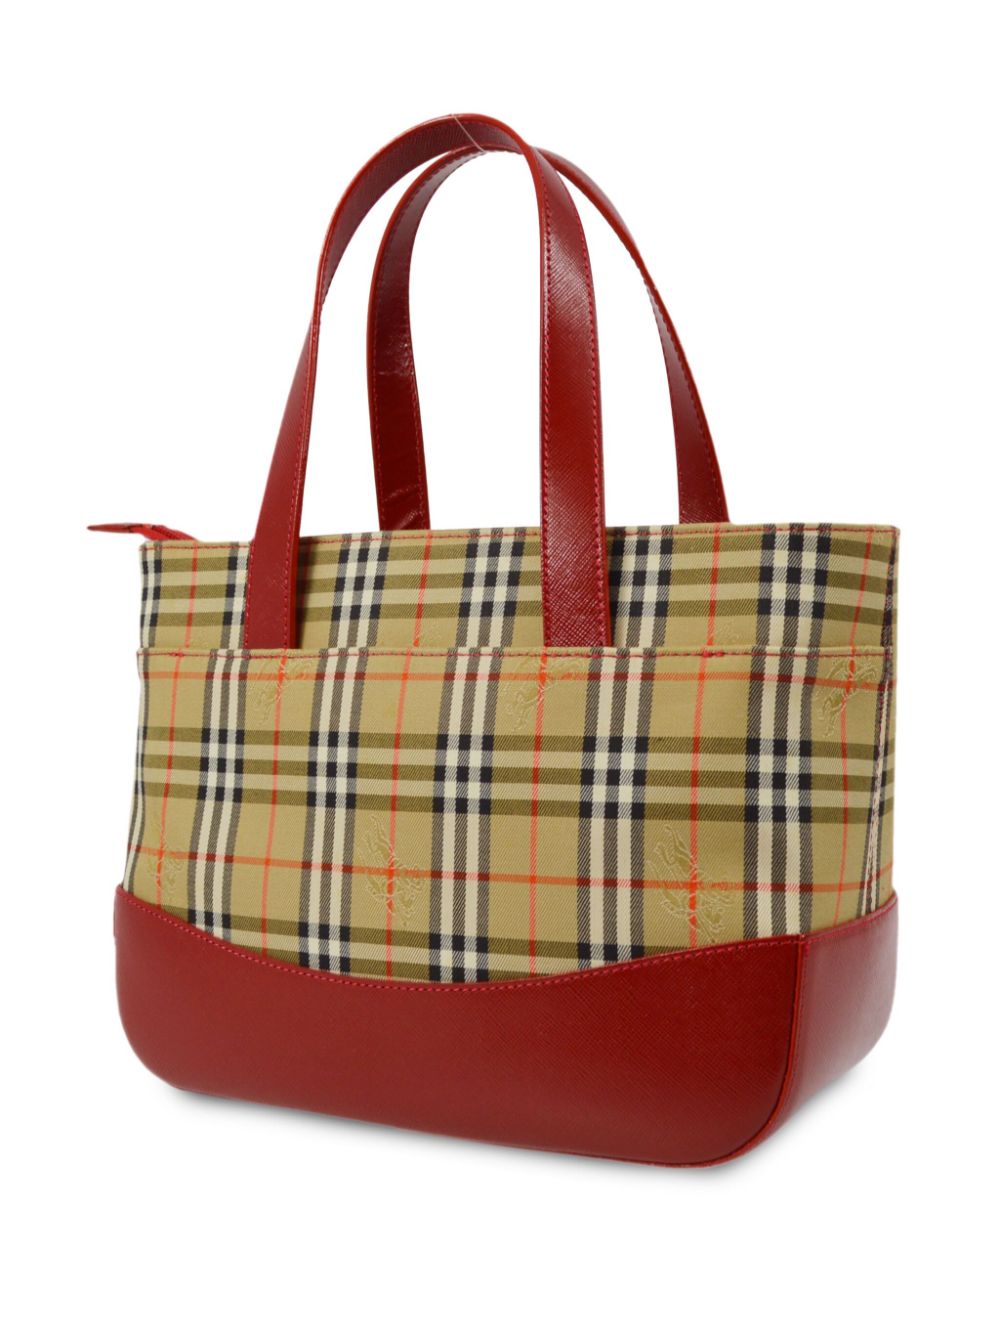 Burberry Pre-Owned 1990-2000 House Check geruite shopper met logobedel - Rood